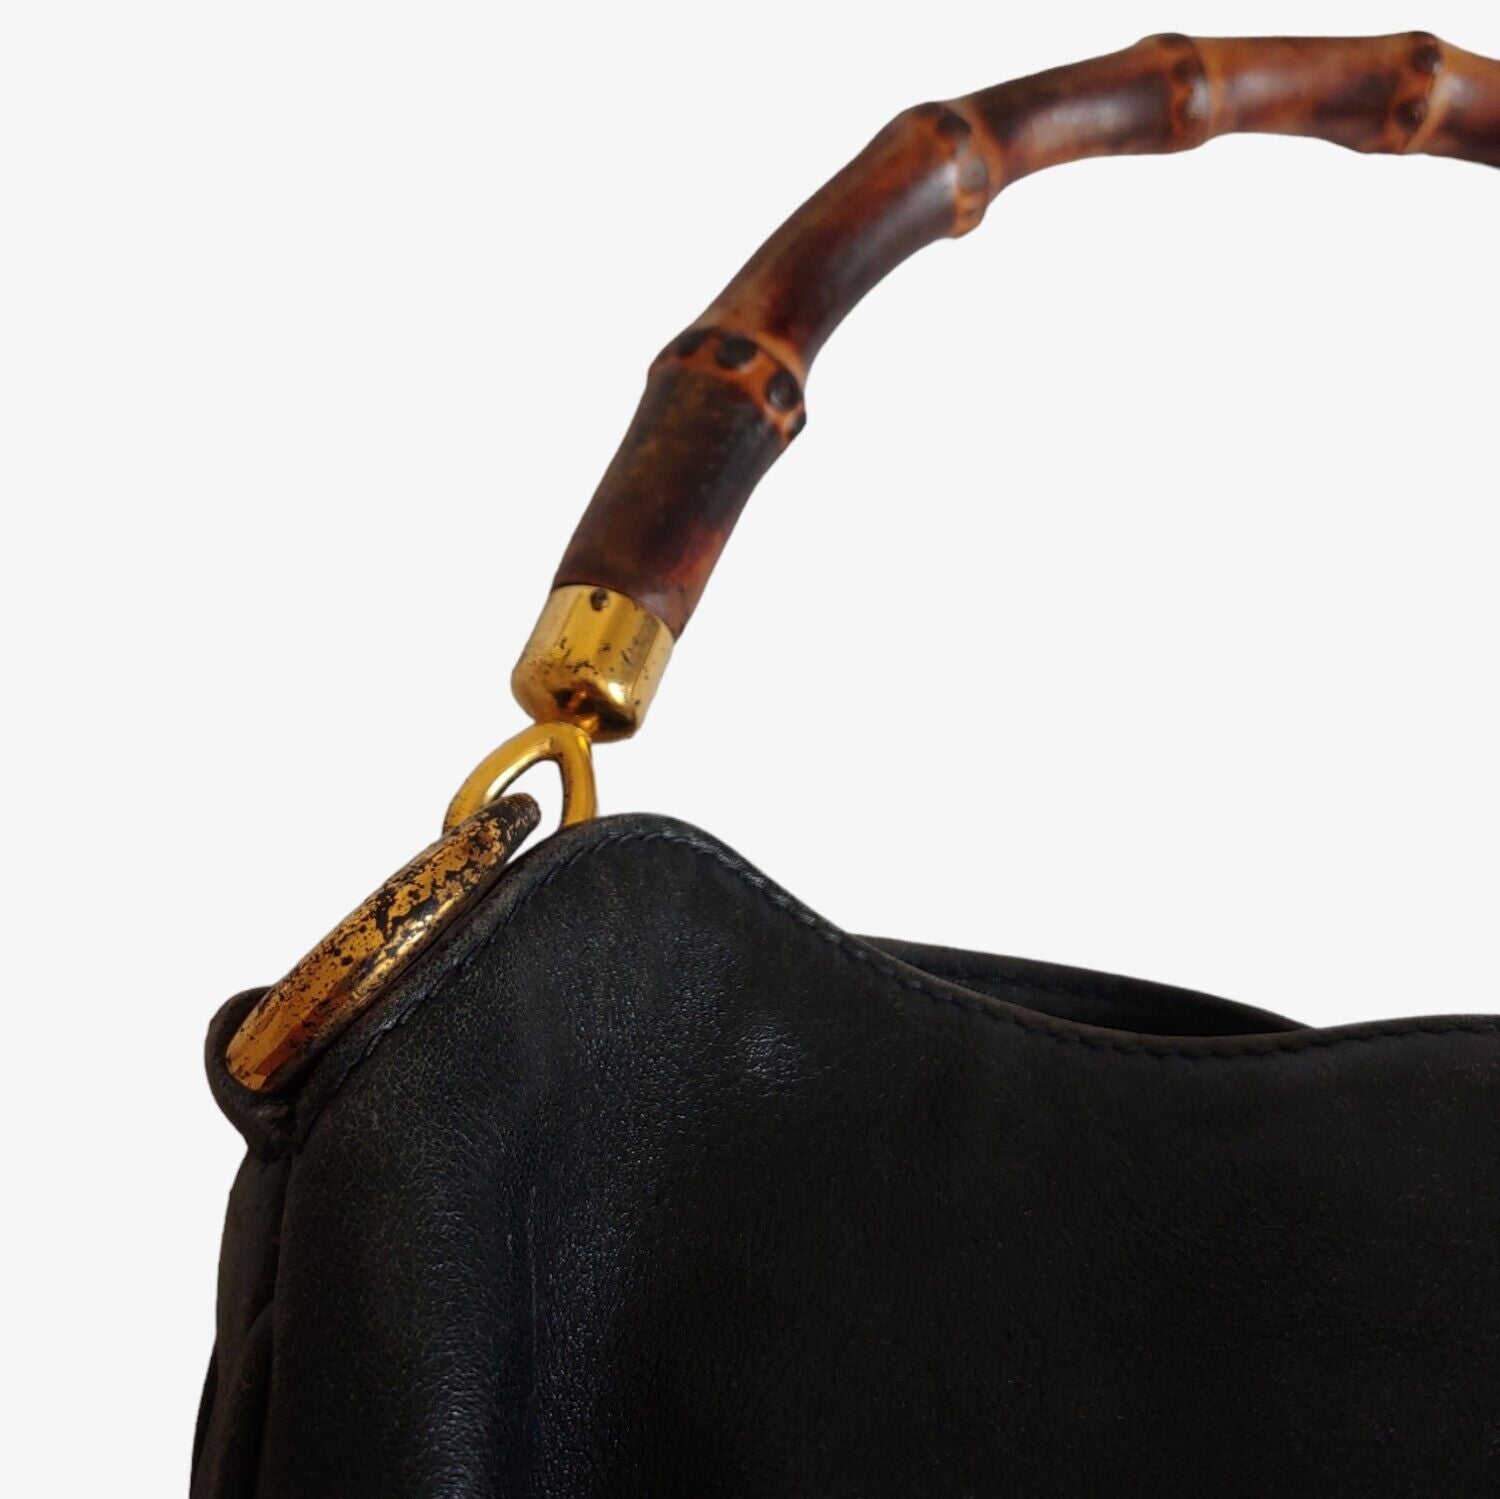 Gucci Black Leather Bamboo Handle Bag - 1950's - GHW